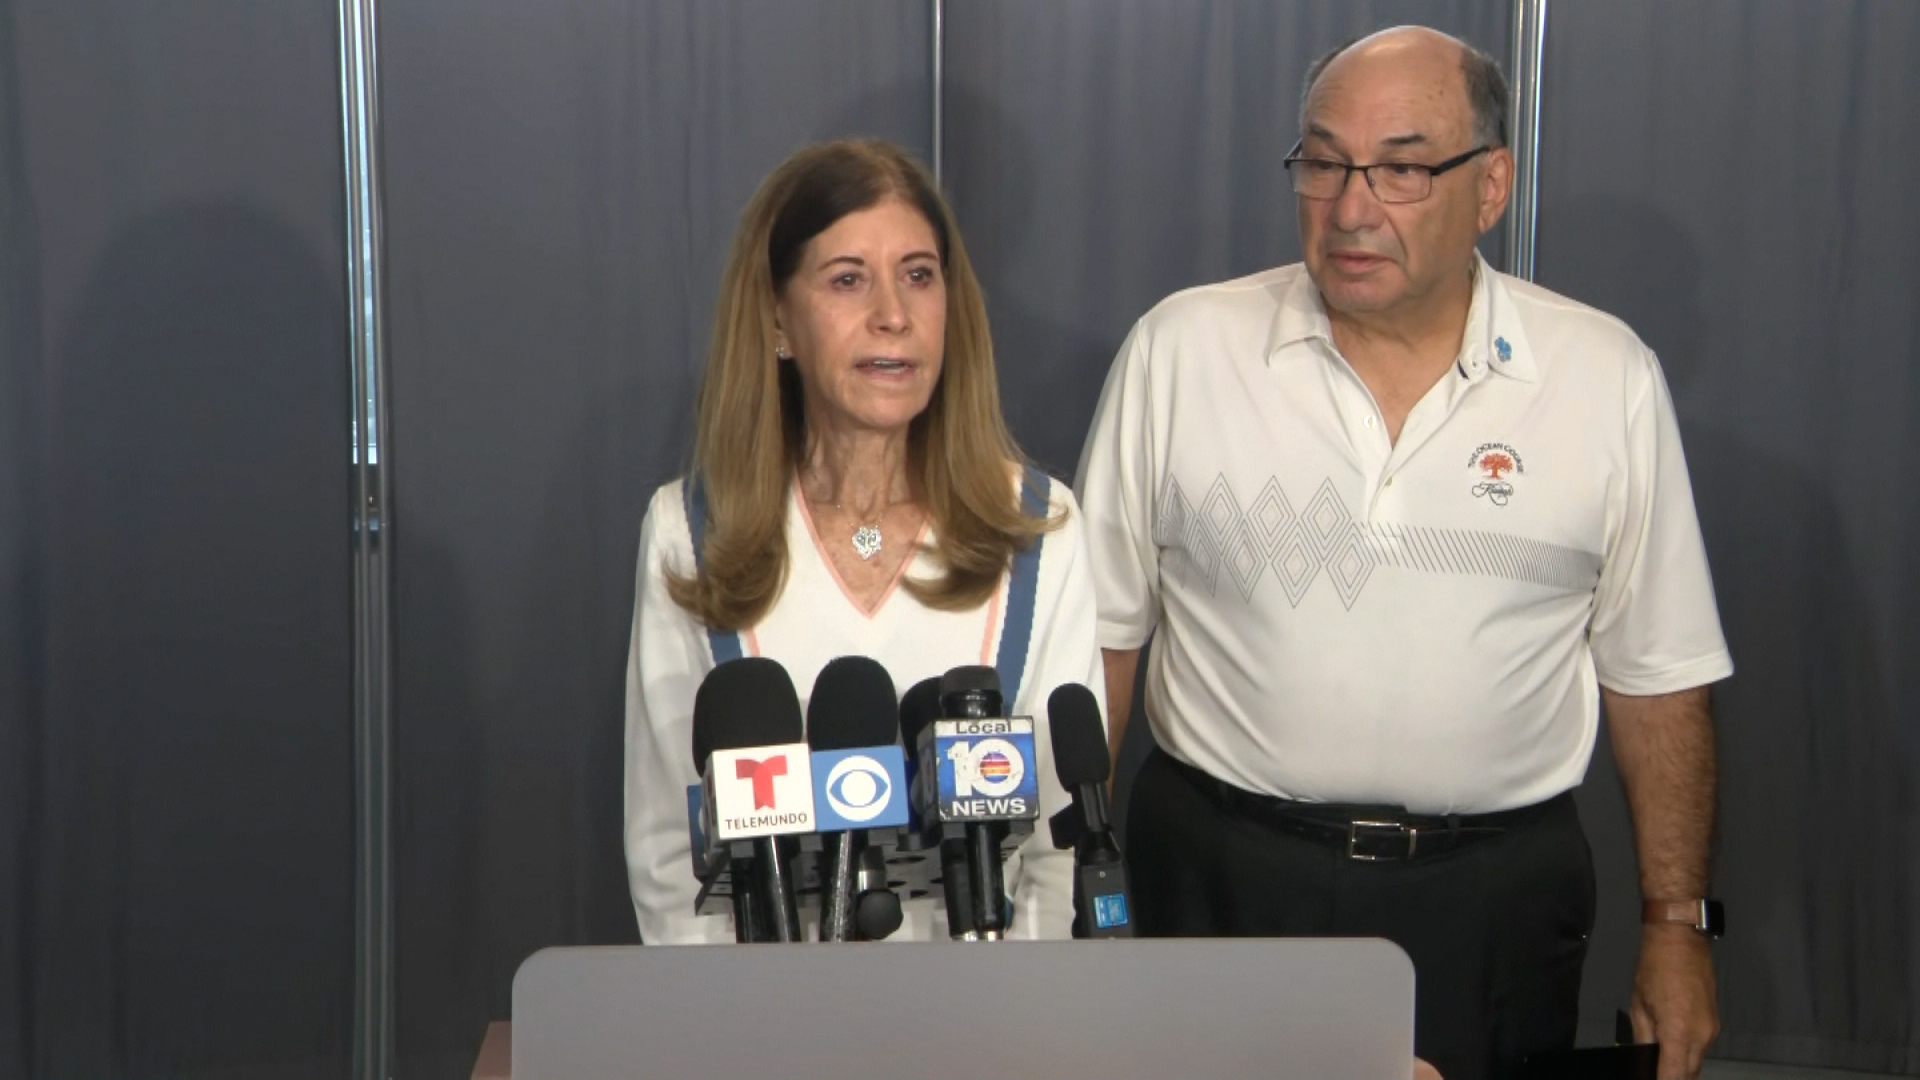 Linda Beigel Schulman and Michael Schulman speak at a press conference on Thursday, October 13. 